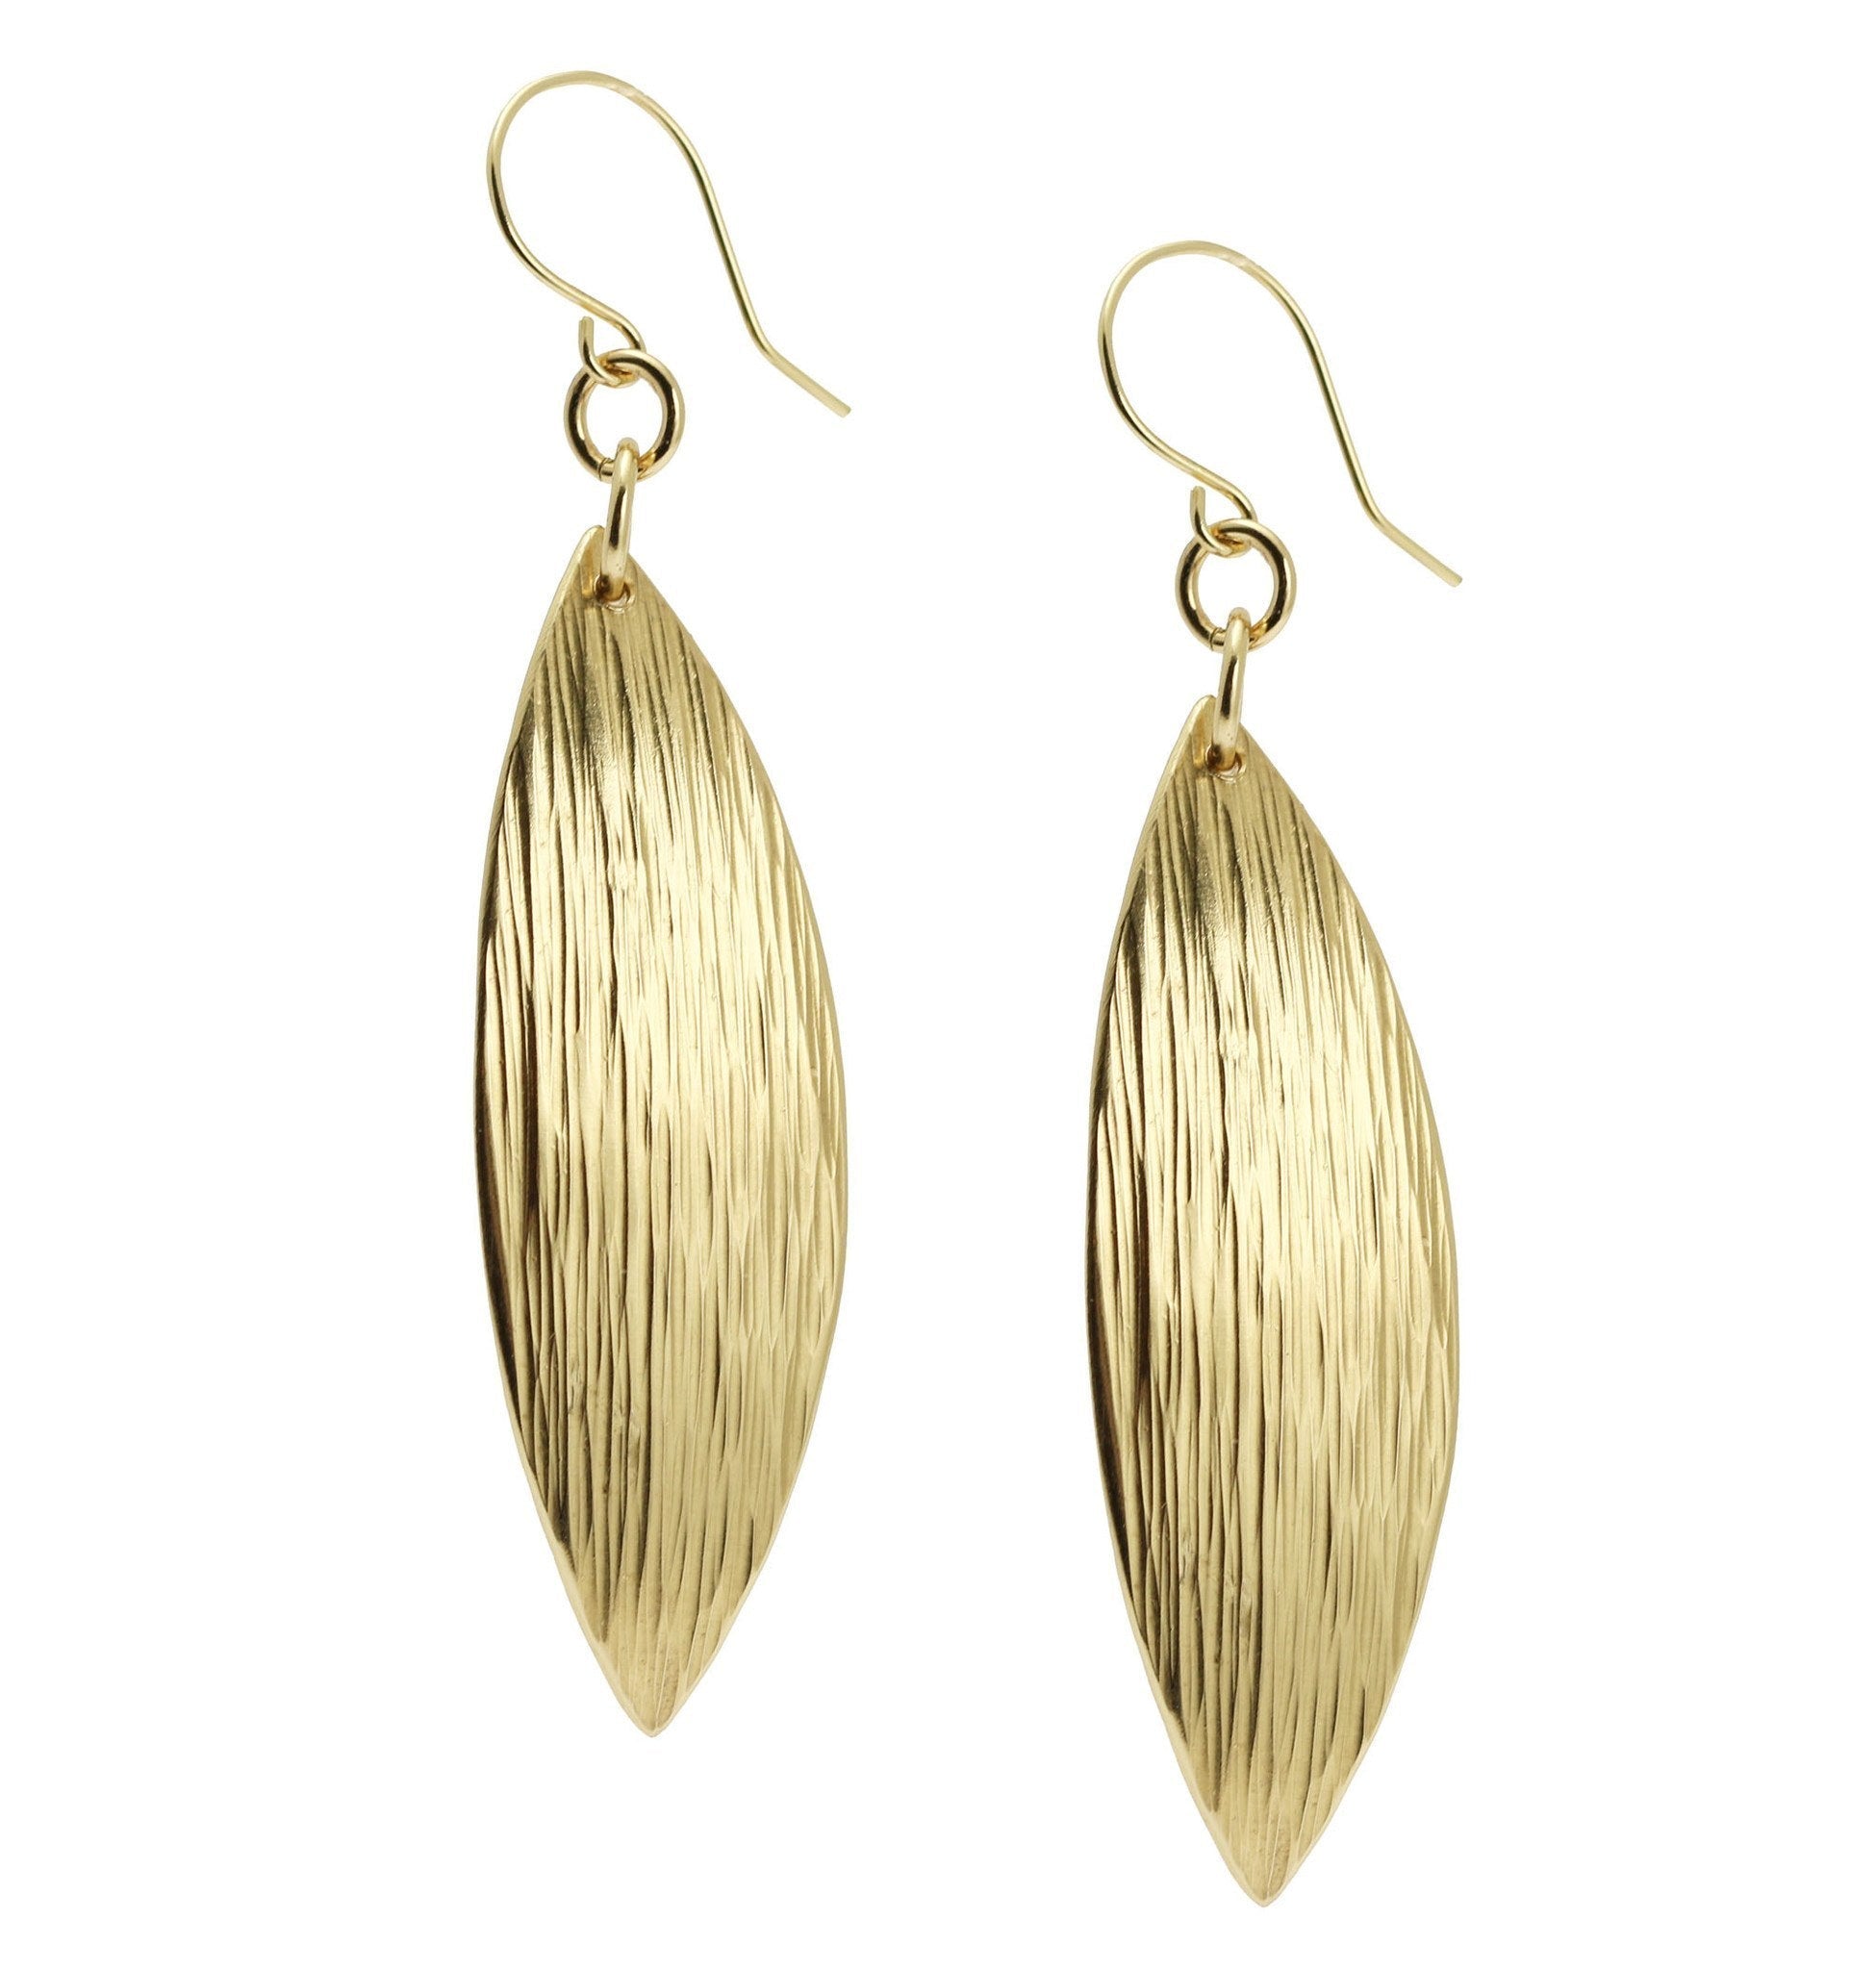 Detail View of Medium Chased Nu Gold Brass Leaf Earrings